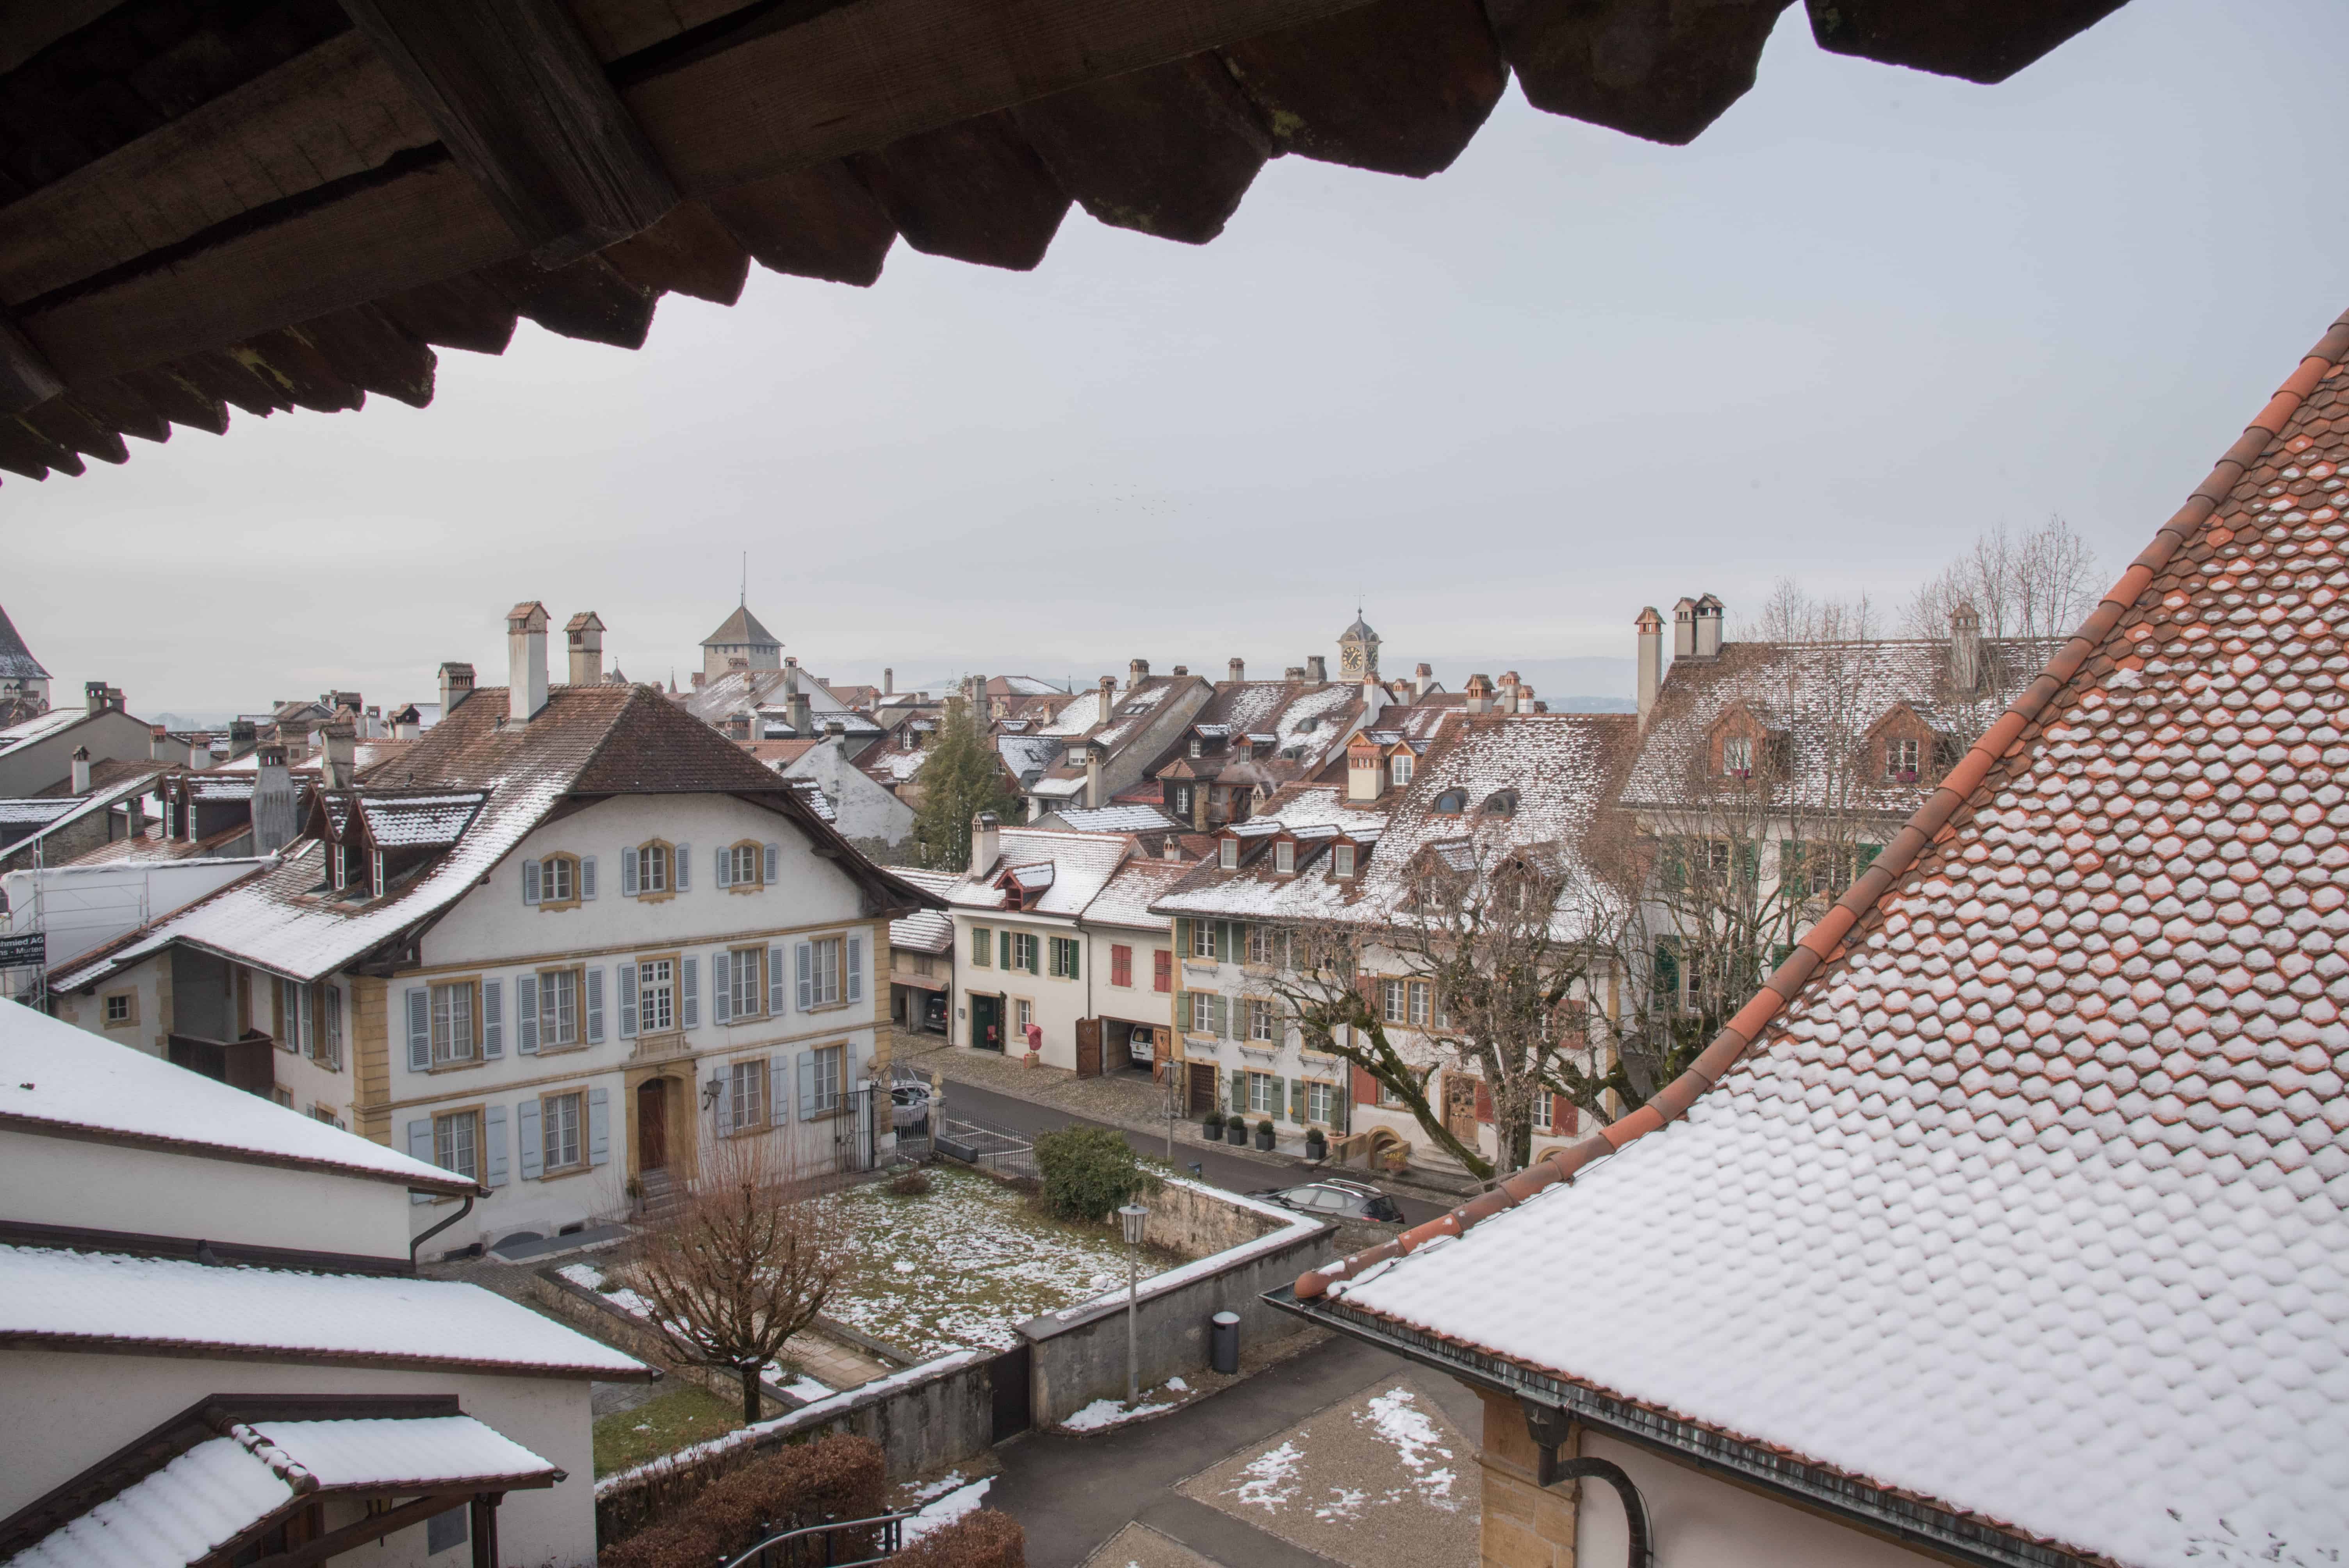 There are three days to explore the Murten Christmas market